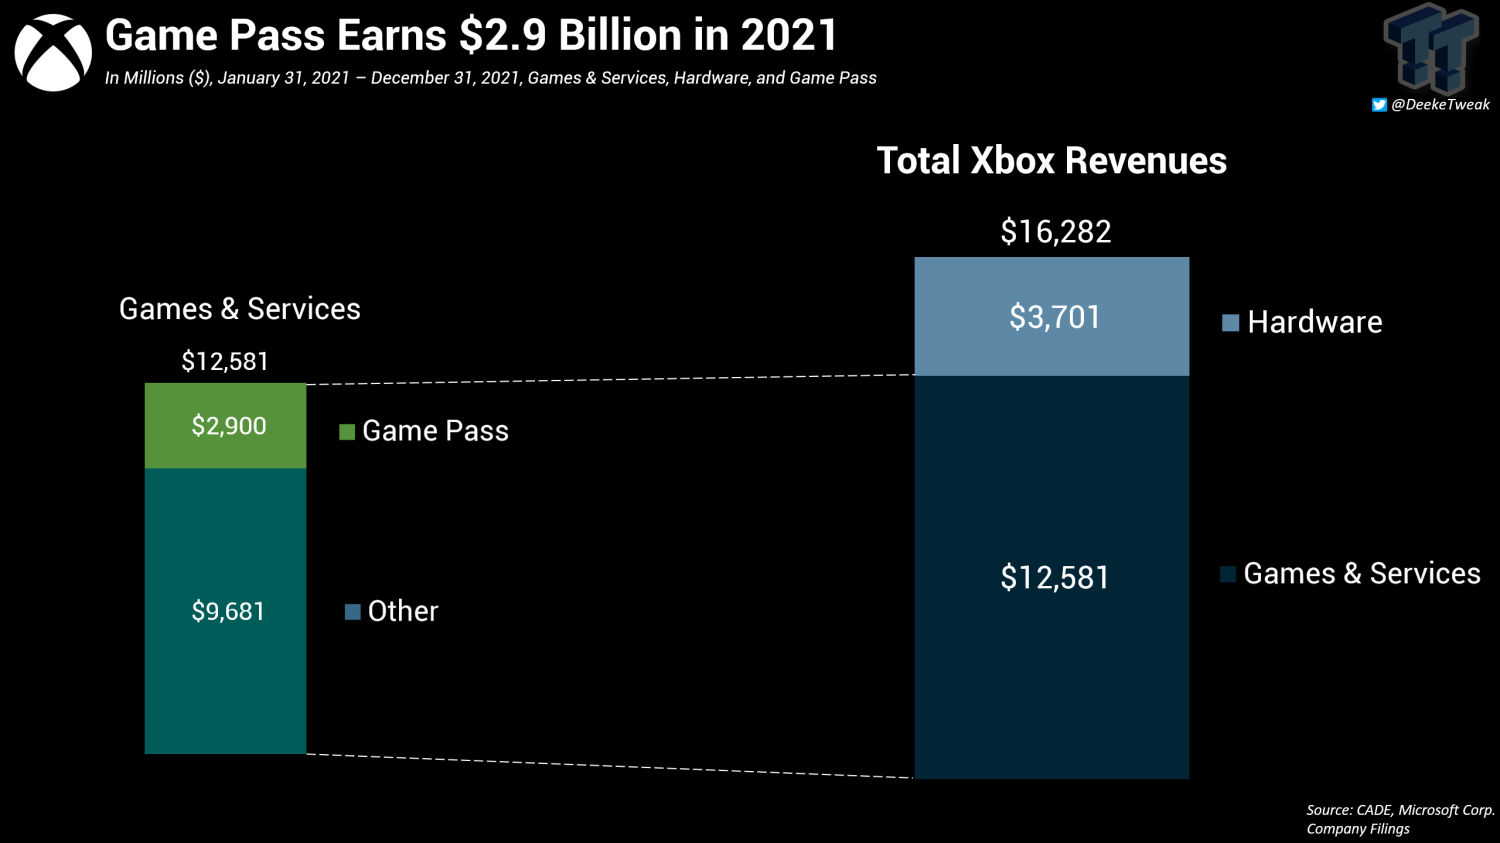 How Much Money Does Microsoft Make From Game Pass?